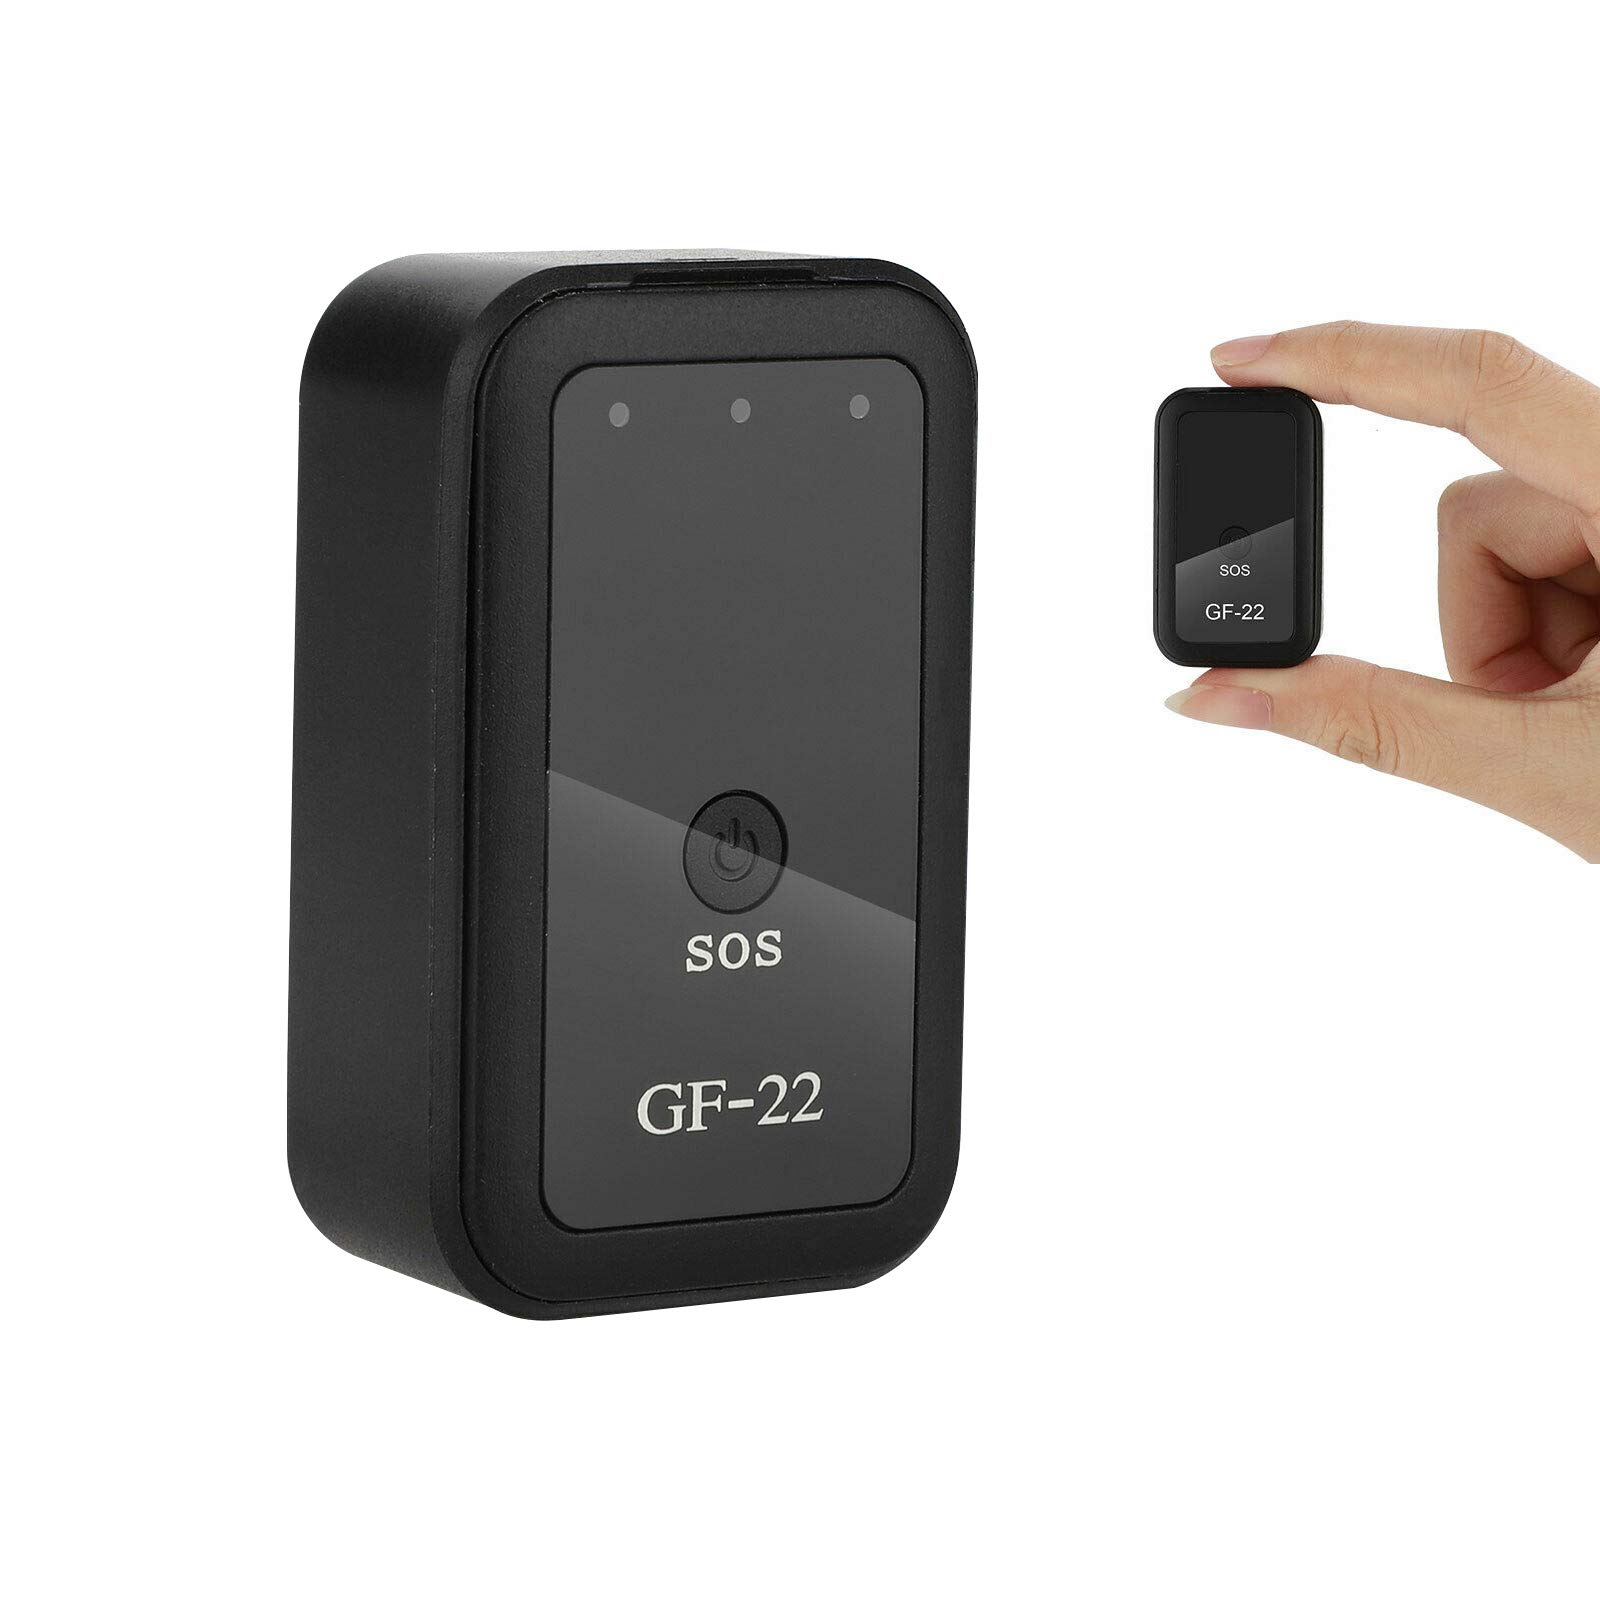 Never Lose Anything Again With This $22 GPS Tracker